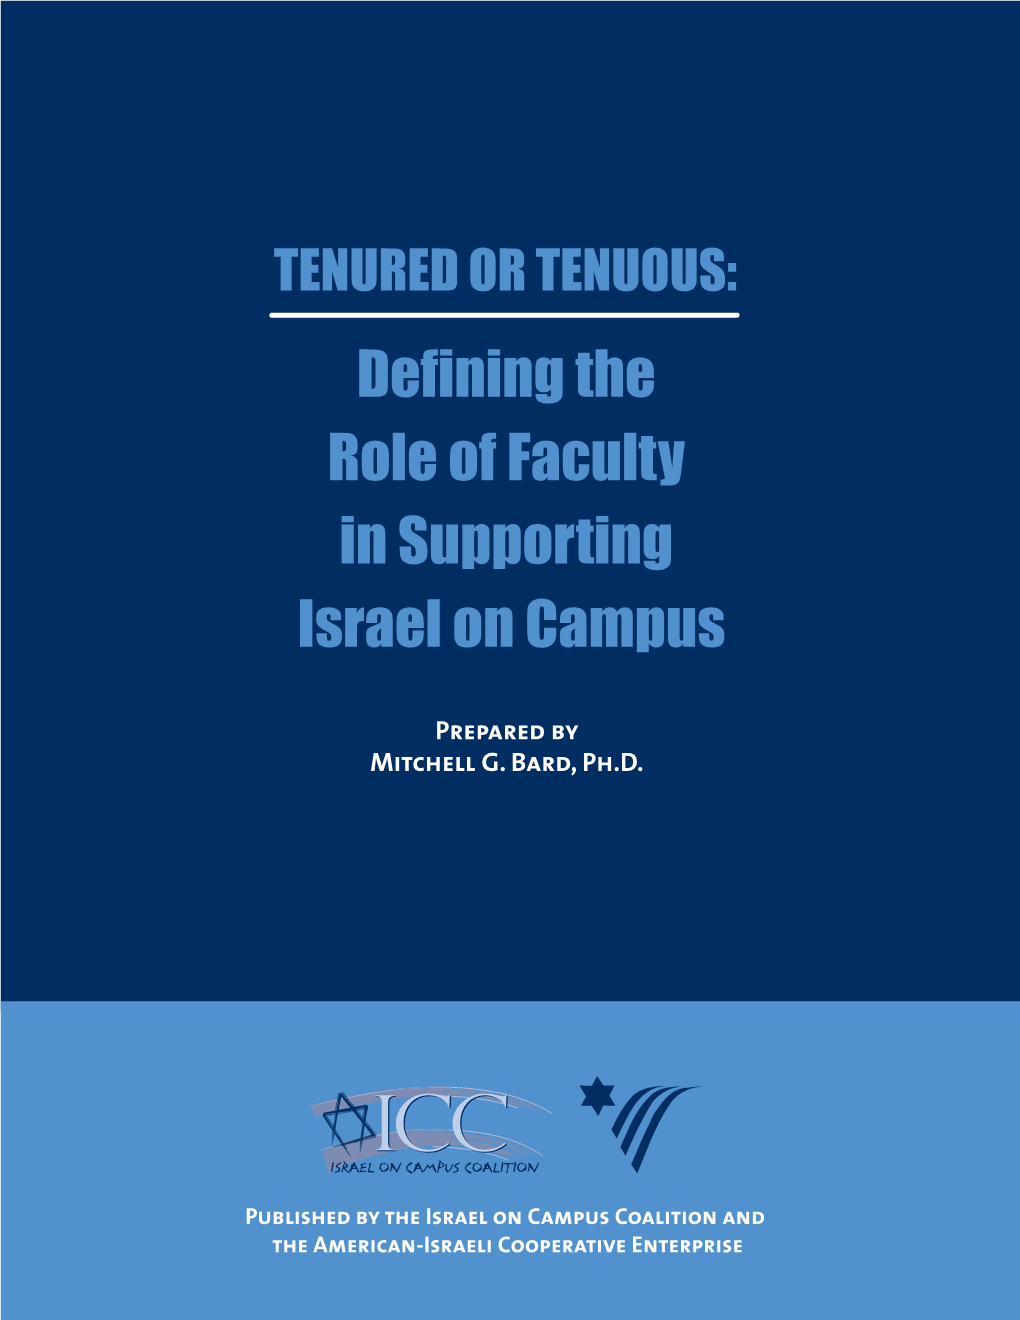 TENURED OR TENUOUS: Defining the Role of Faculty in Supporting Israel on Campus